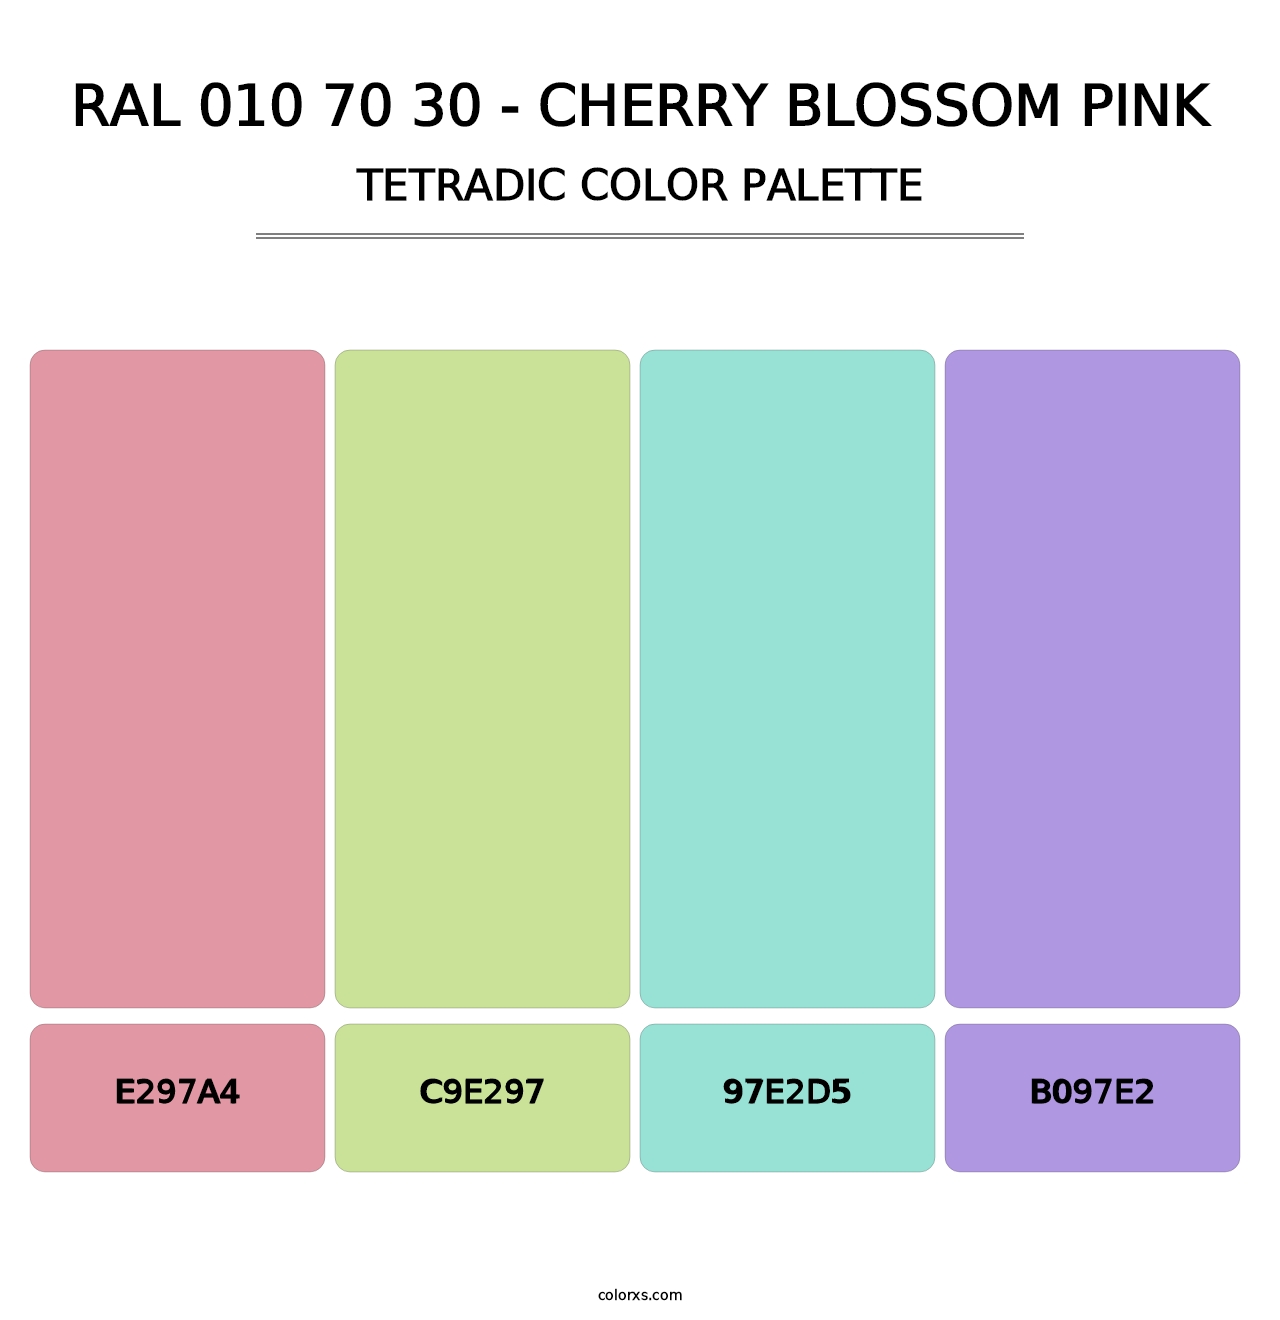 RAL 010 70 30 - Cherry Blossom Pink - Tetradic Color Palette